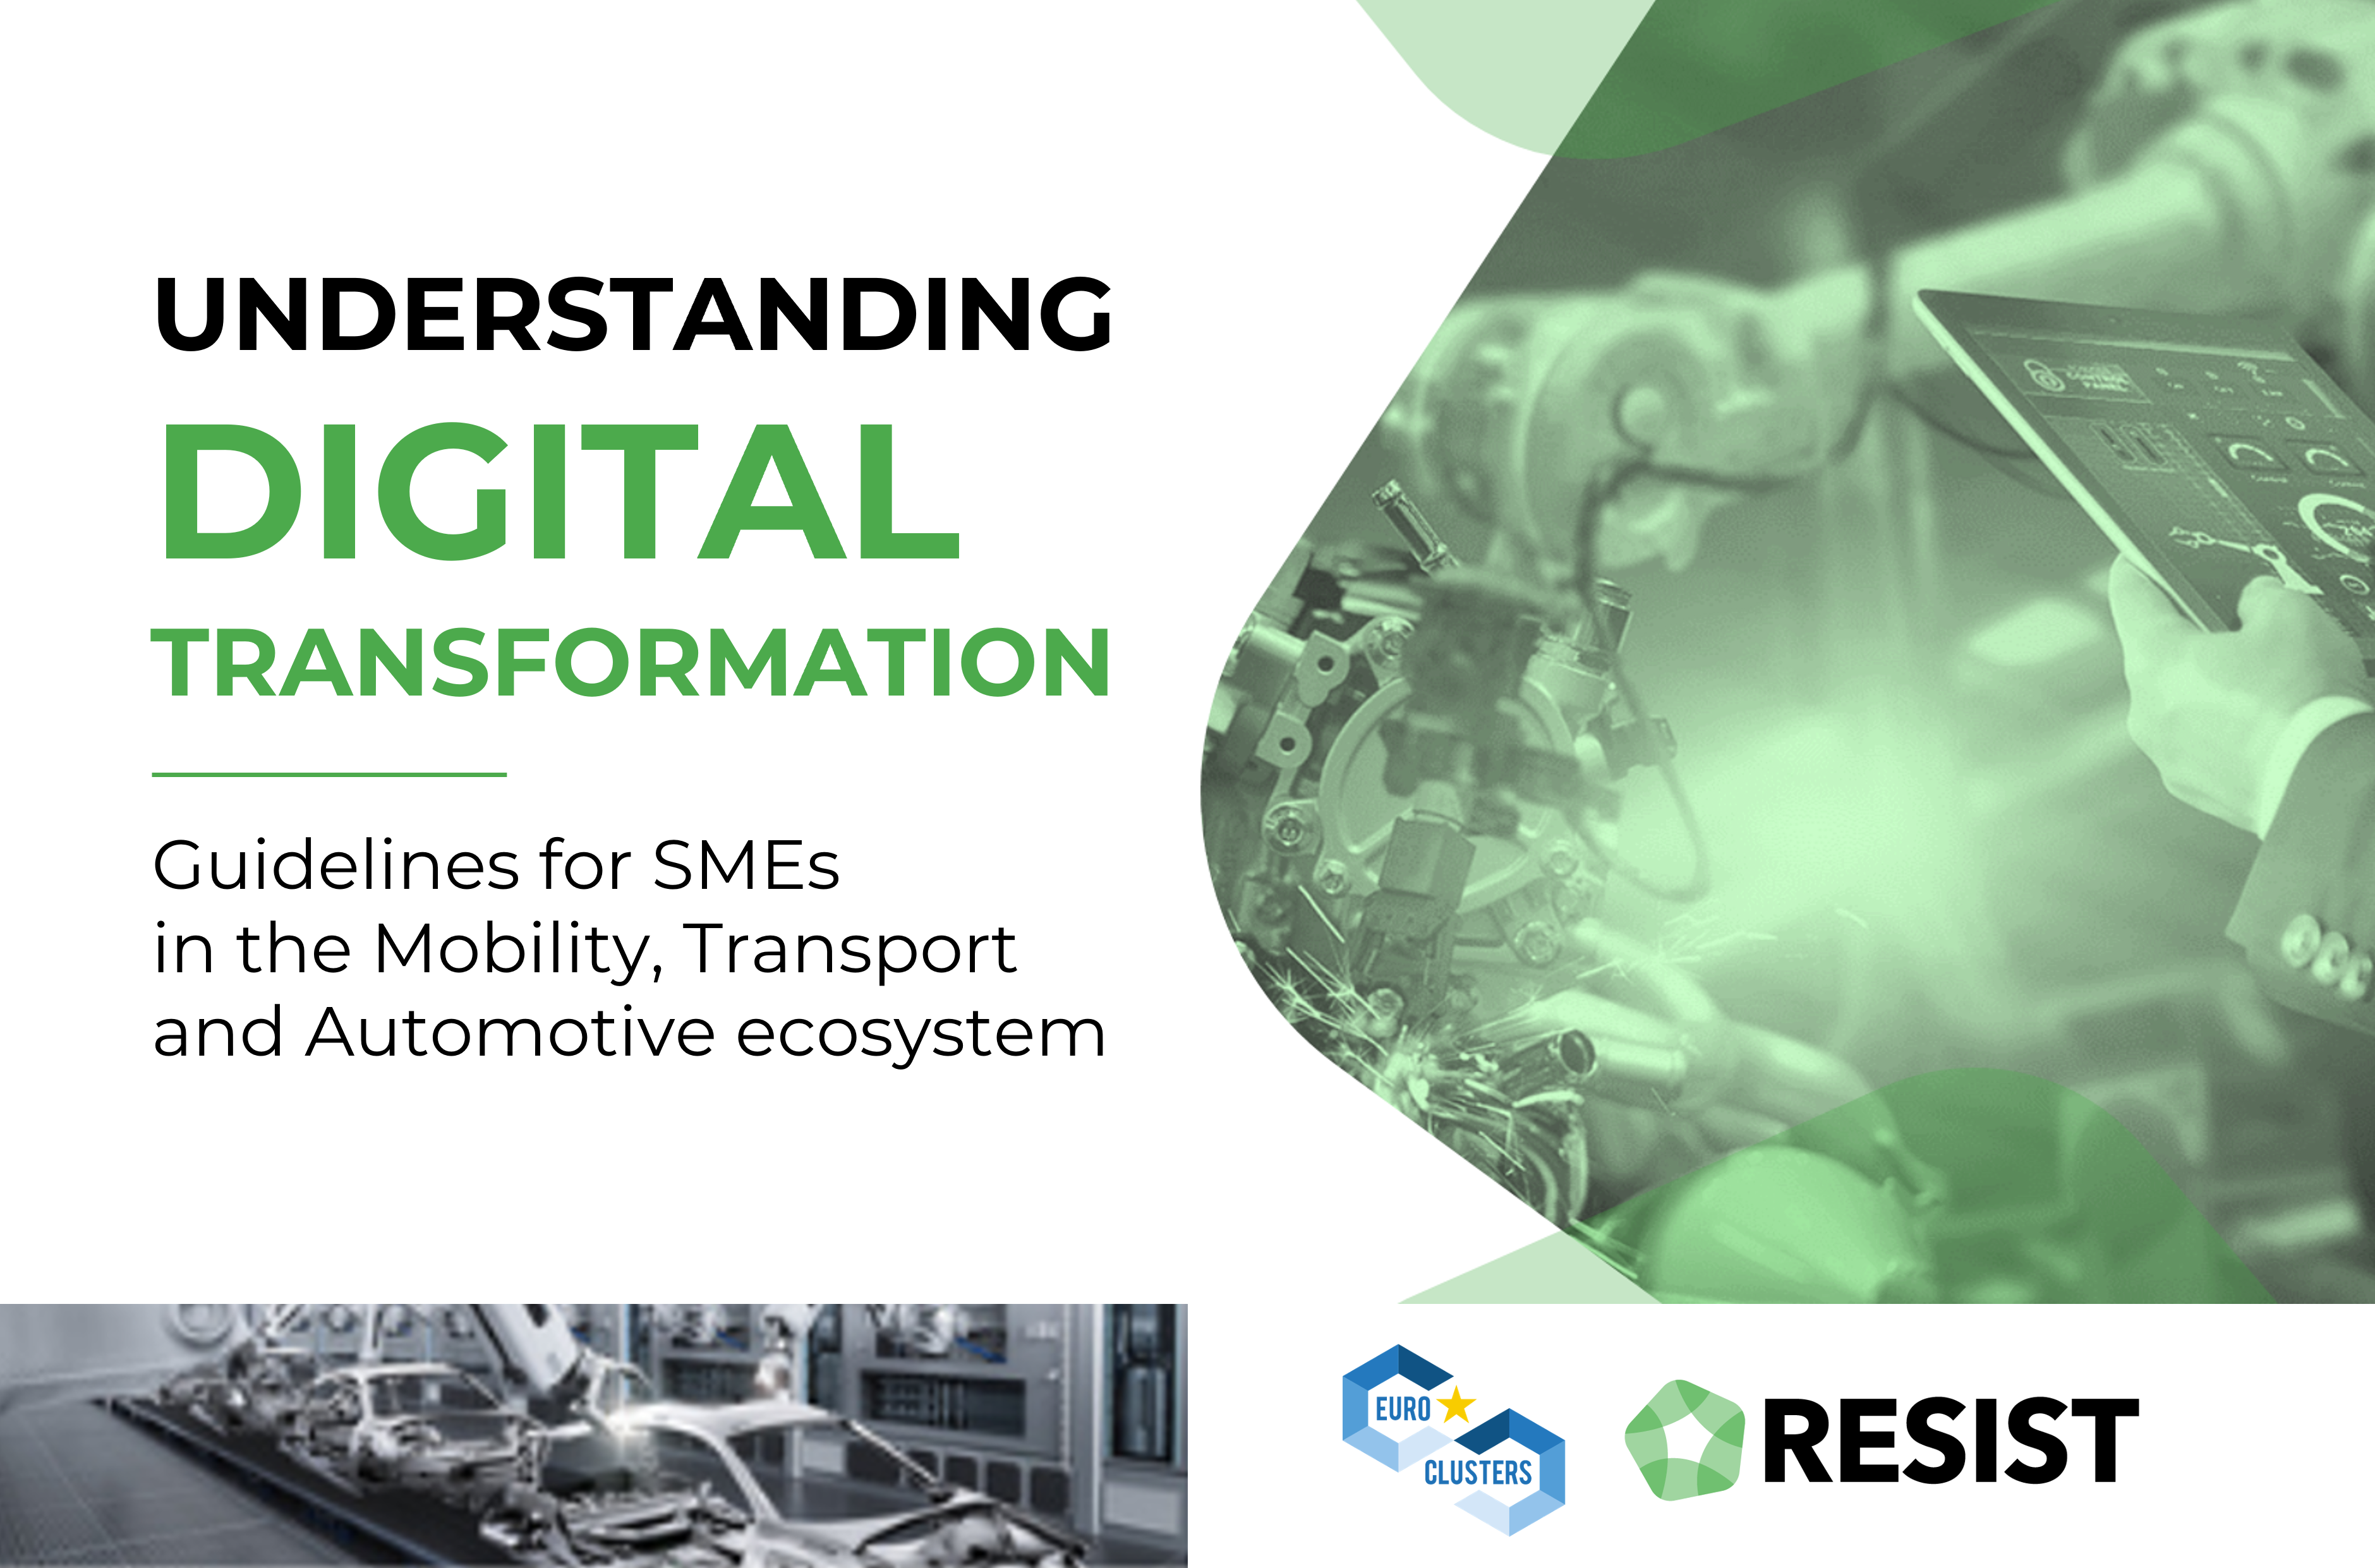 RESIST - Understanding Digital Transformation. Guidelines for SMEs in the MTA ecosystem